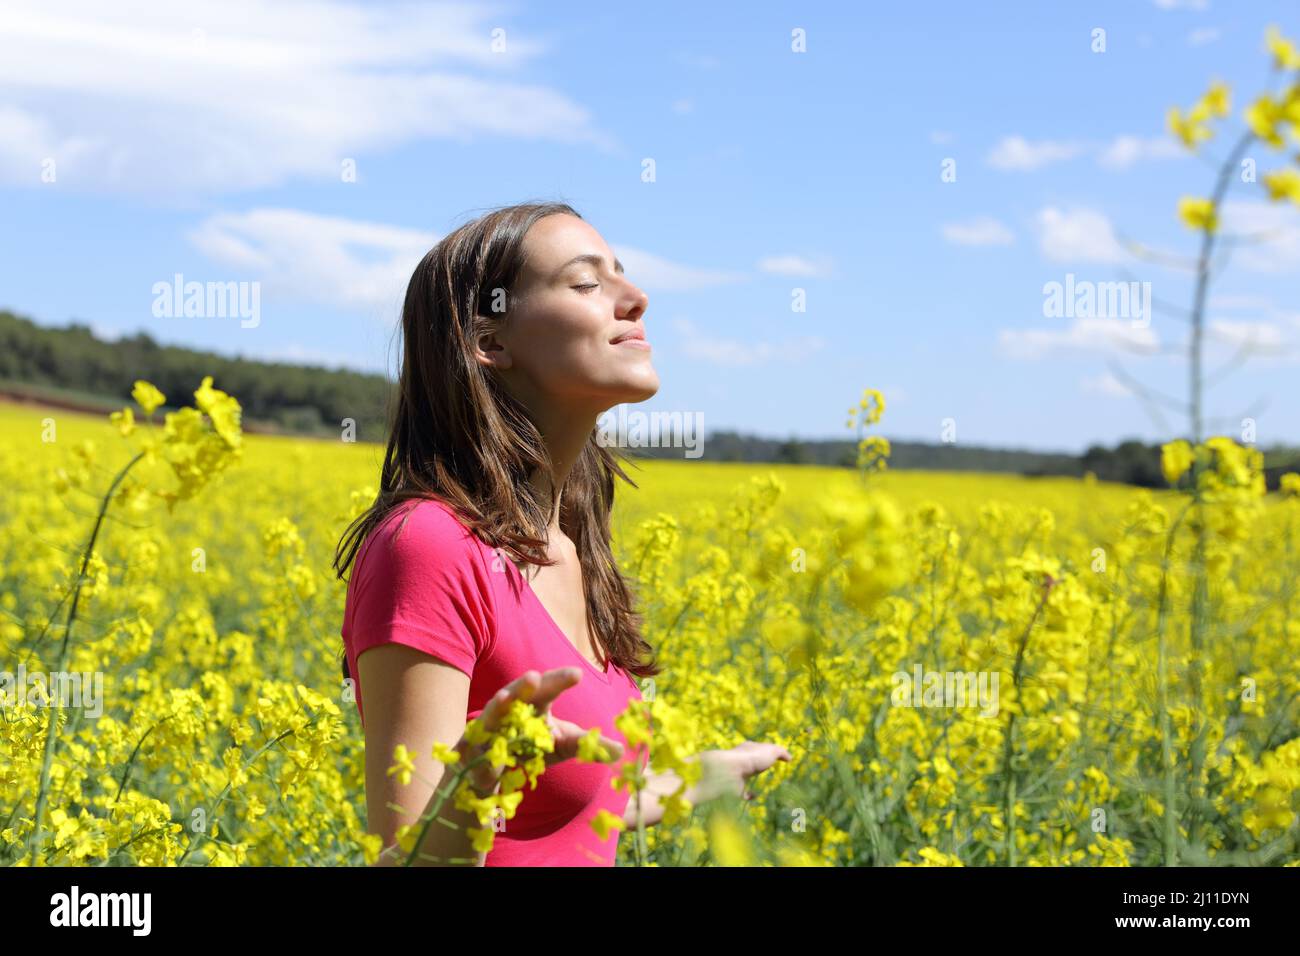 Happy woman breathing fresh air in the middle of a yellow field touching plants Stock Photo